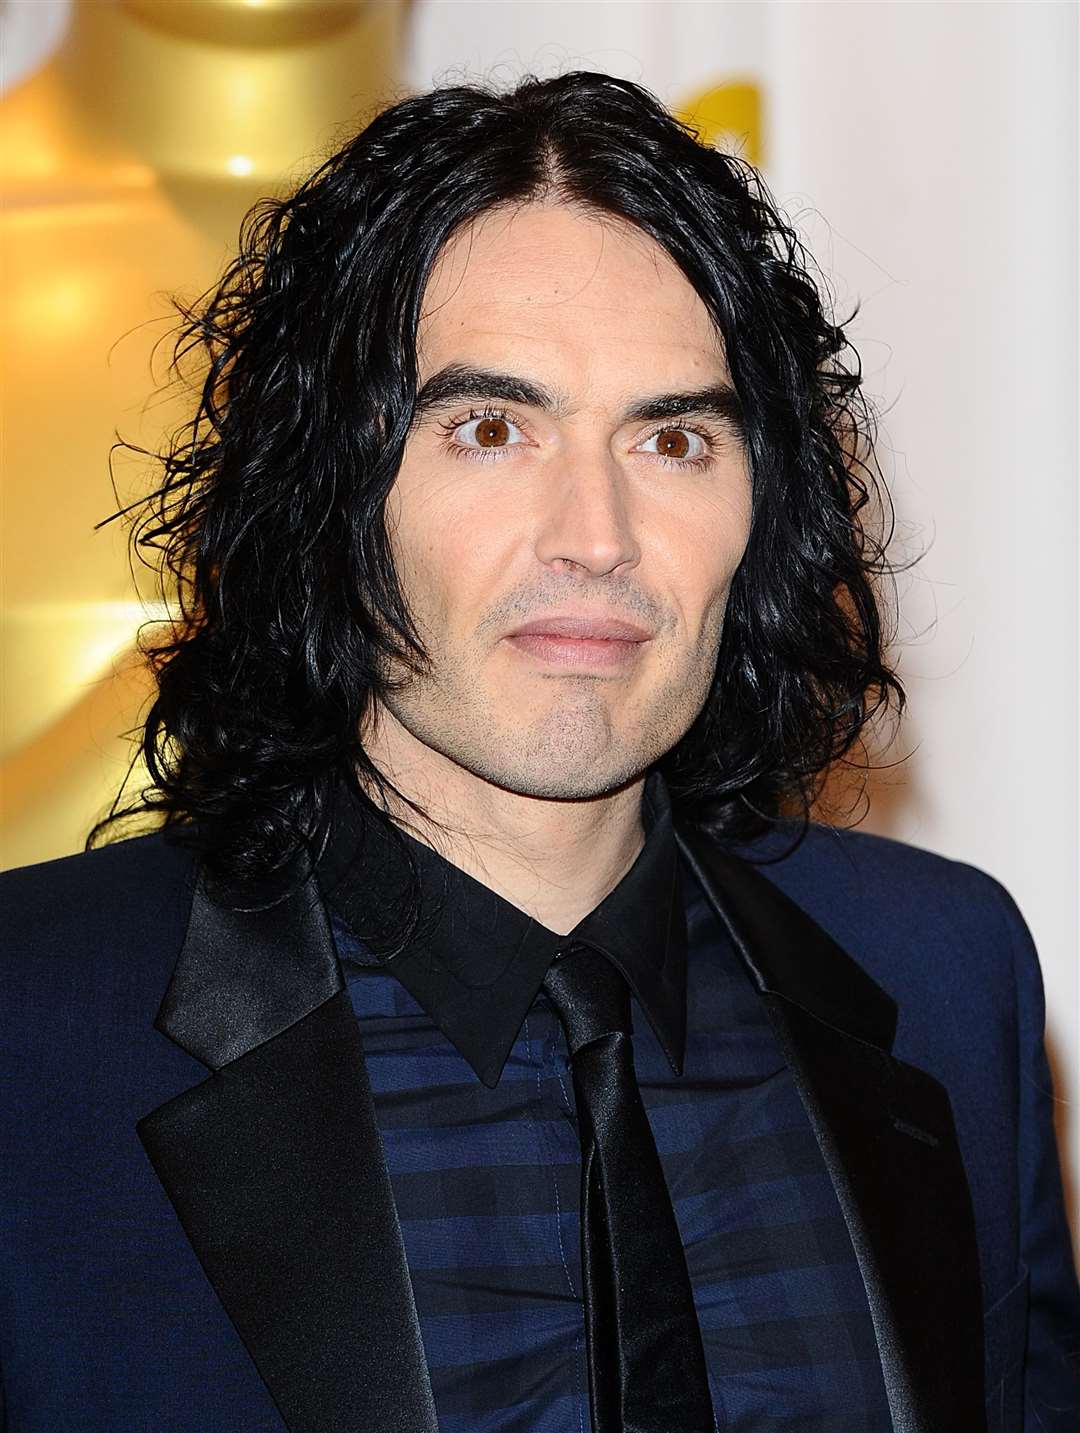 Russell Brand has denied allegations of sexual assault (Ian West/PA)